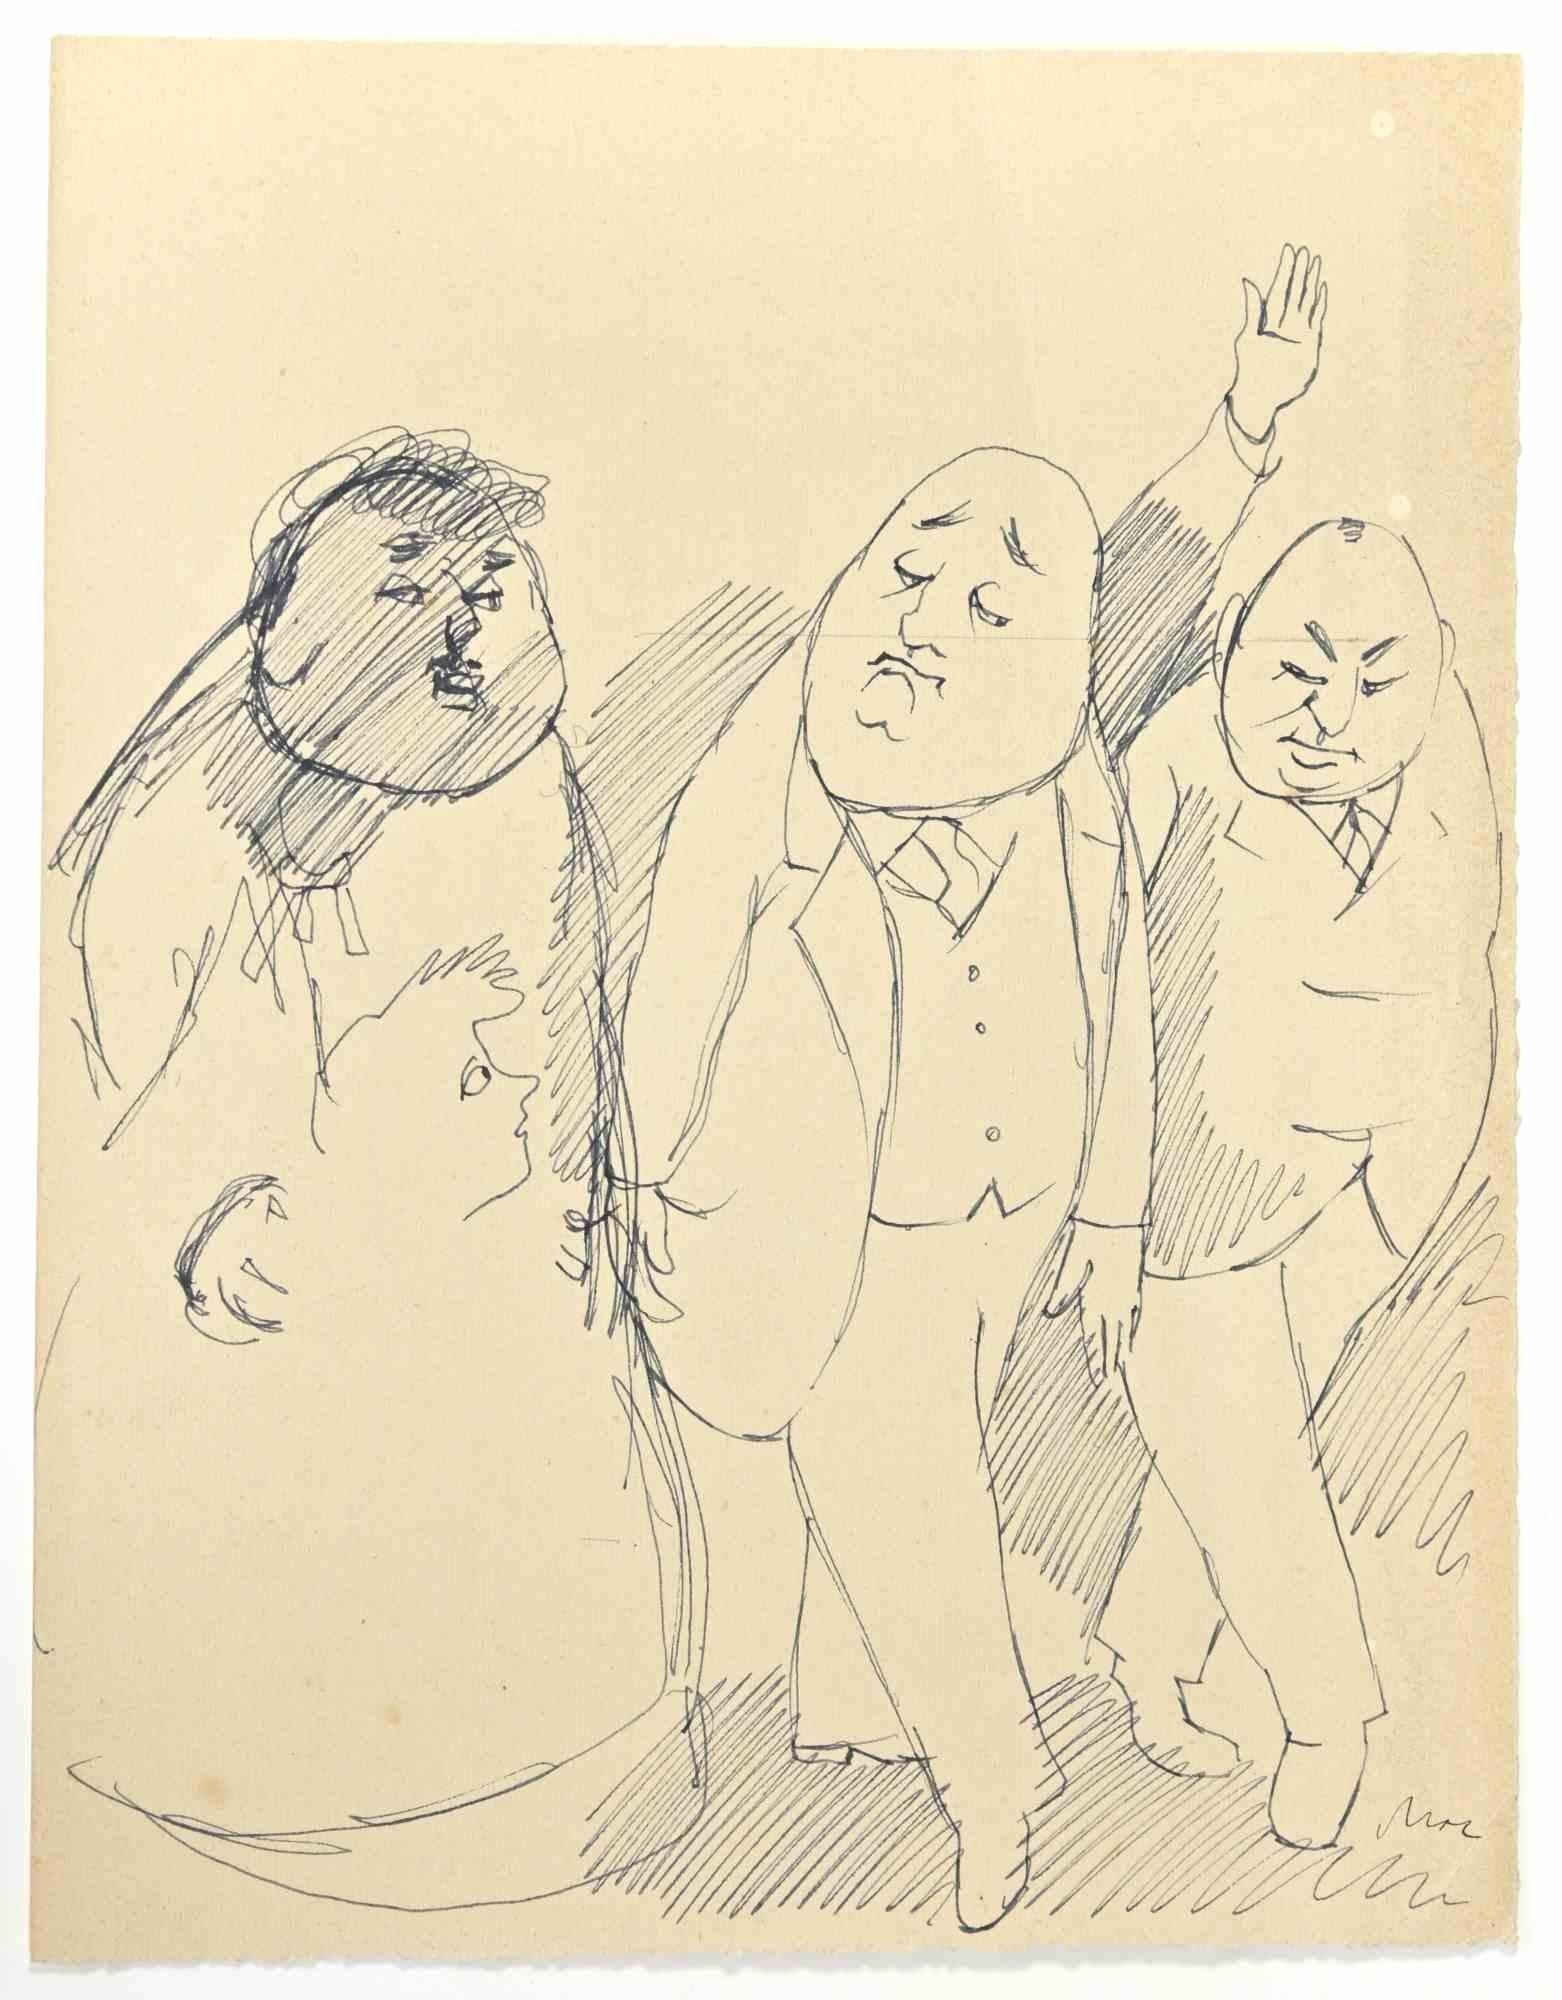 The Greeting is a Pen Drawing realized by Mino Maccari  (1924-1989) in the 1960s.

Monogrammed on the lower.

Good condition.

Mino Maccari (Siena, 1924-Rome, June 16, 1989) was an Italian writer, painter, engraver and journalist, winner of the